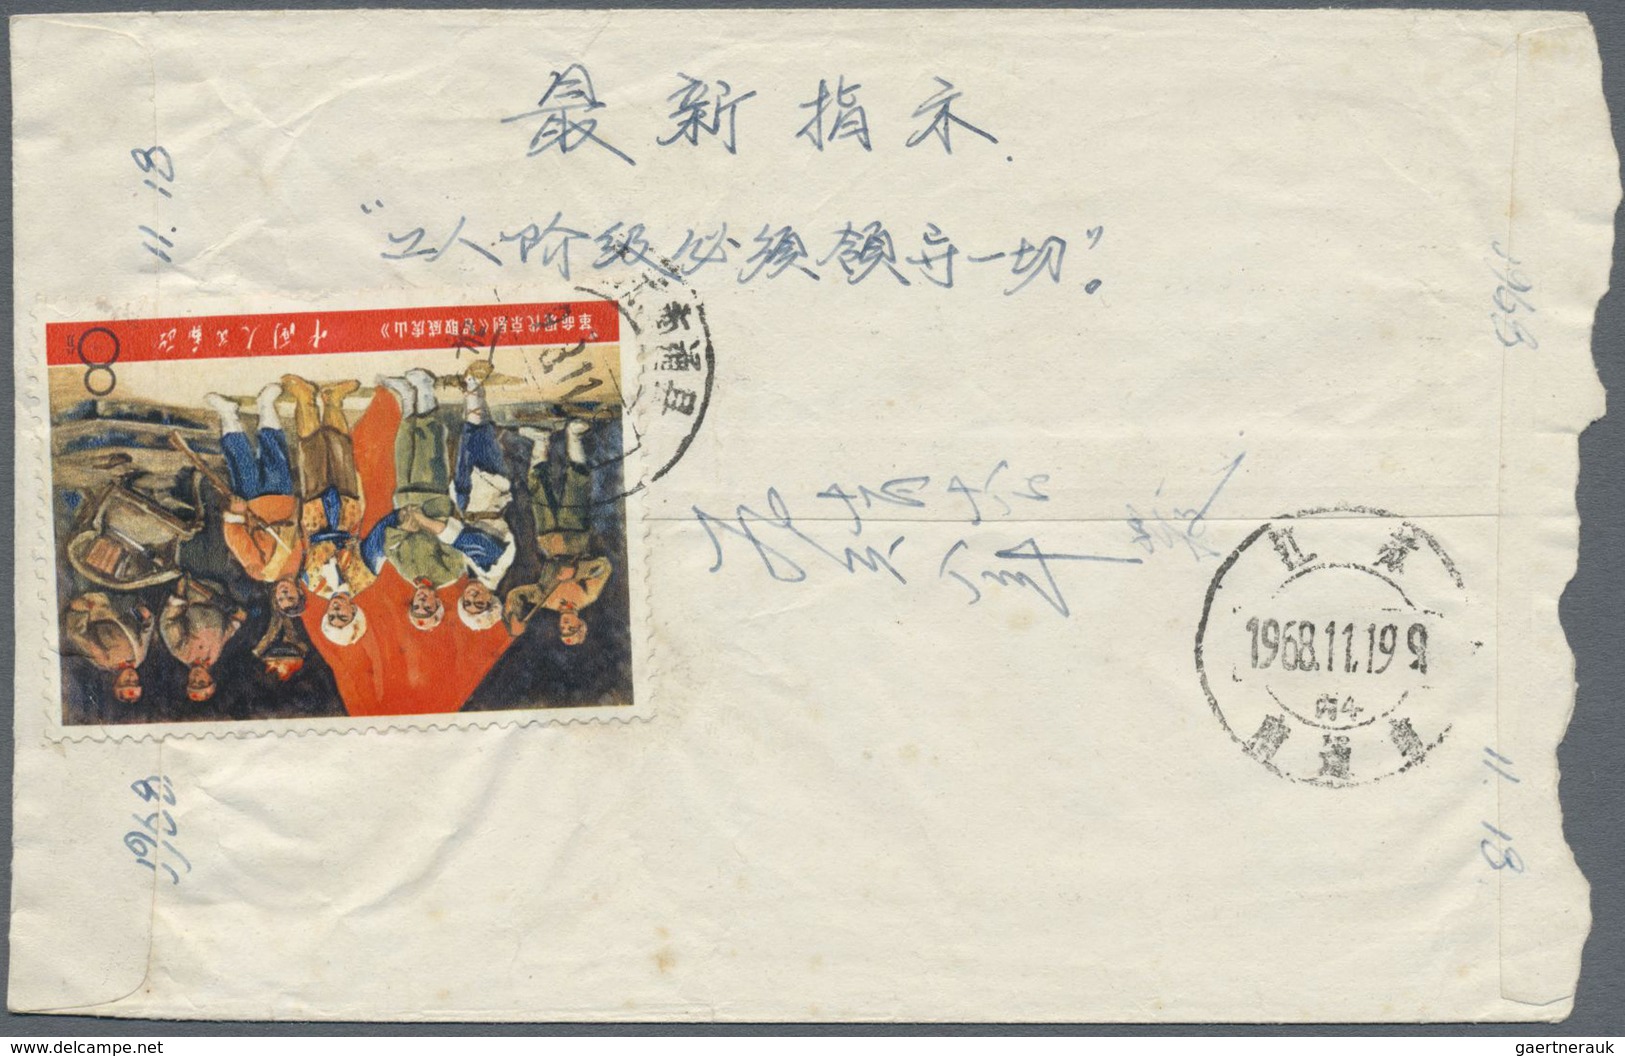 Br China - Volksrepublik: 1968, revolutionary opera (W5) set on nine commercially used inland covers, p